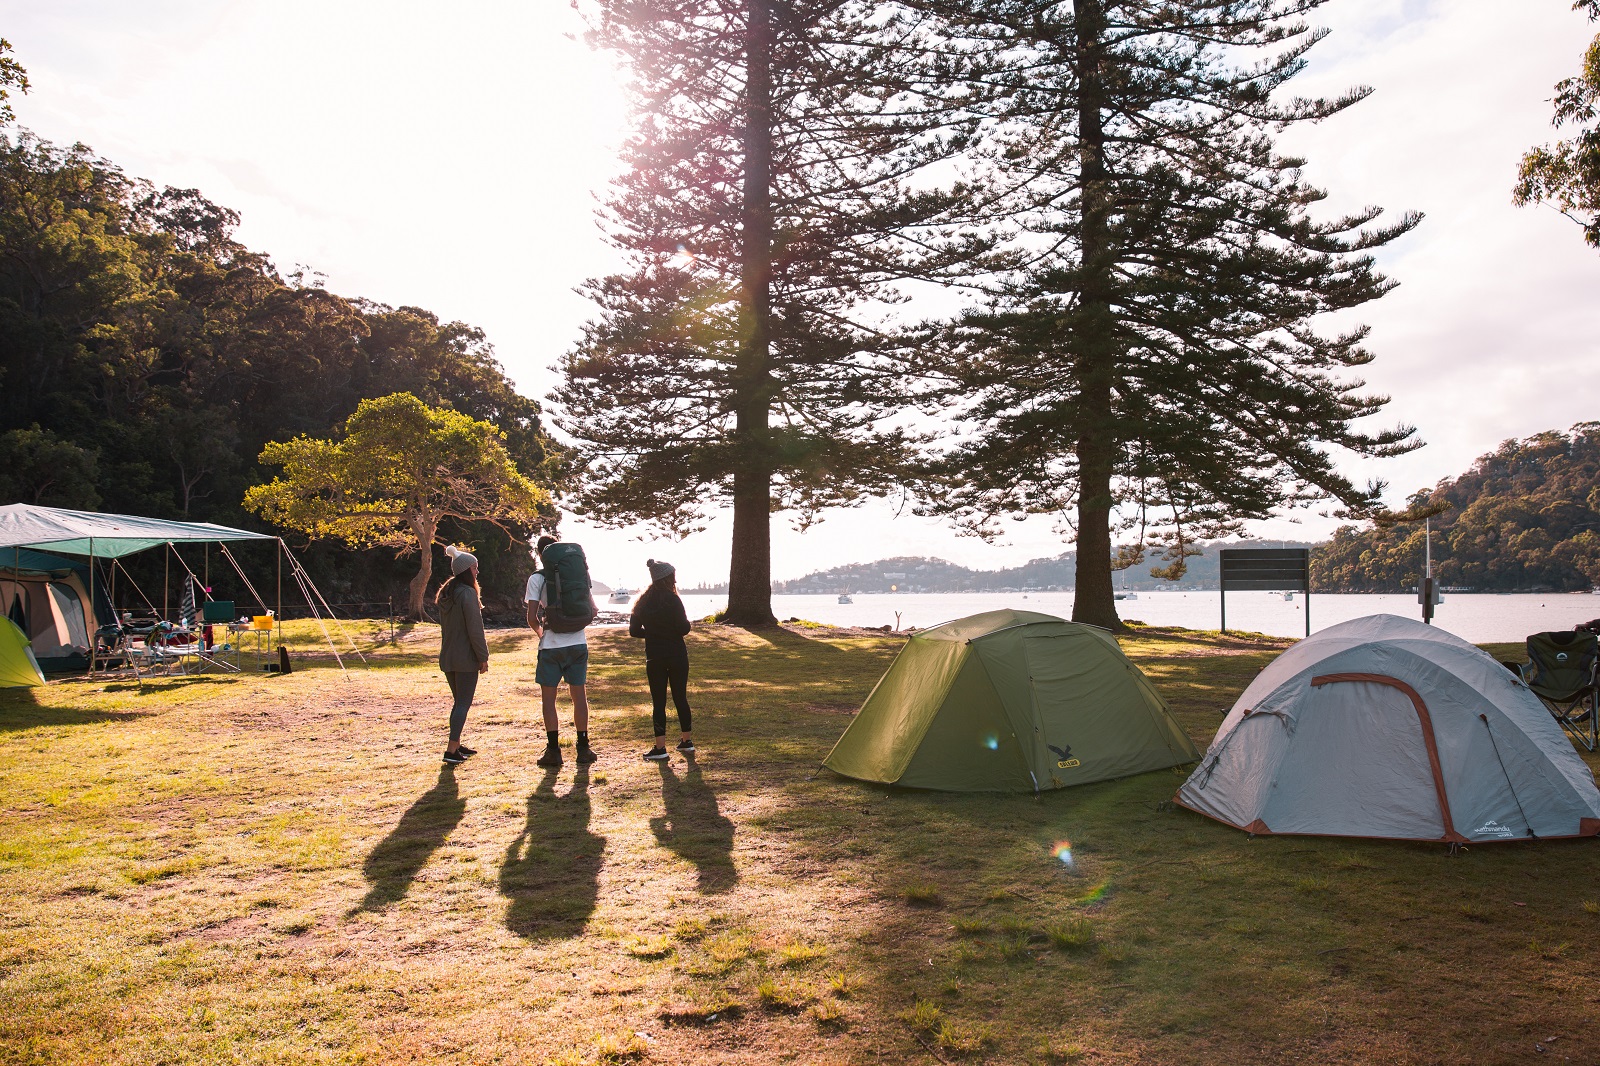 People camping at The Basin campground in Ku-ring-gai Chase National Park. Photo credit: Tim Clark / DPE